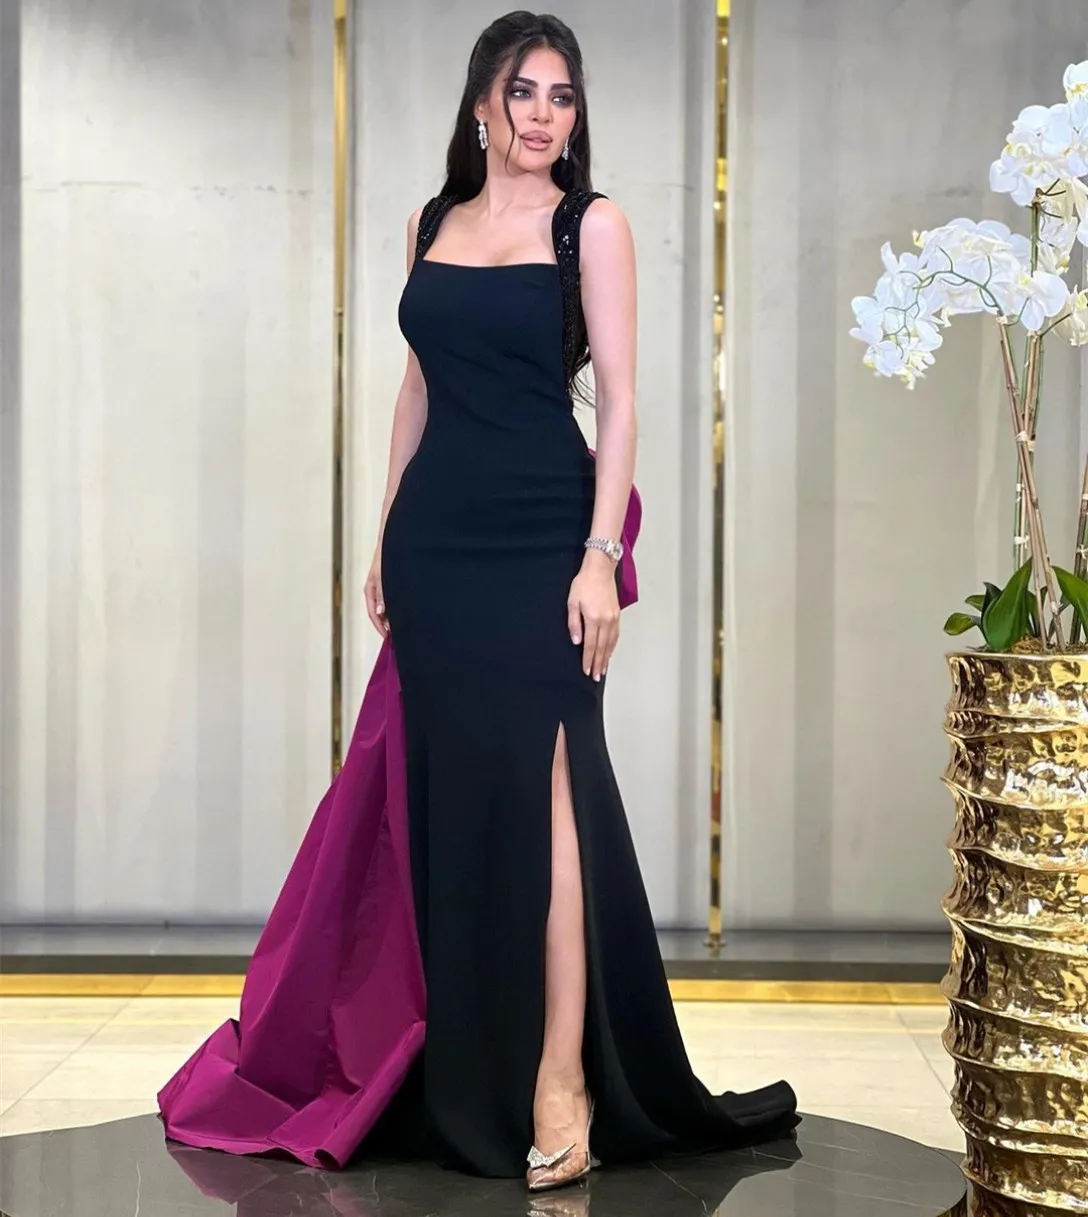 Classy Long Black Crepe Evening Dresses With Fuchsia Train/Bow Mermaid Square Collar Side Slit Sweep Train Prom Dress Party Dresses for Women